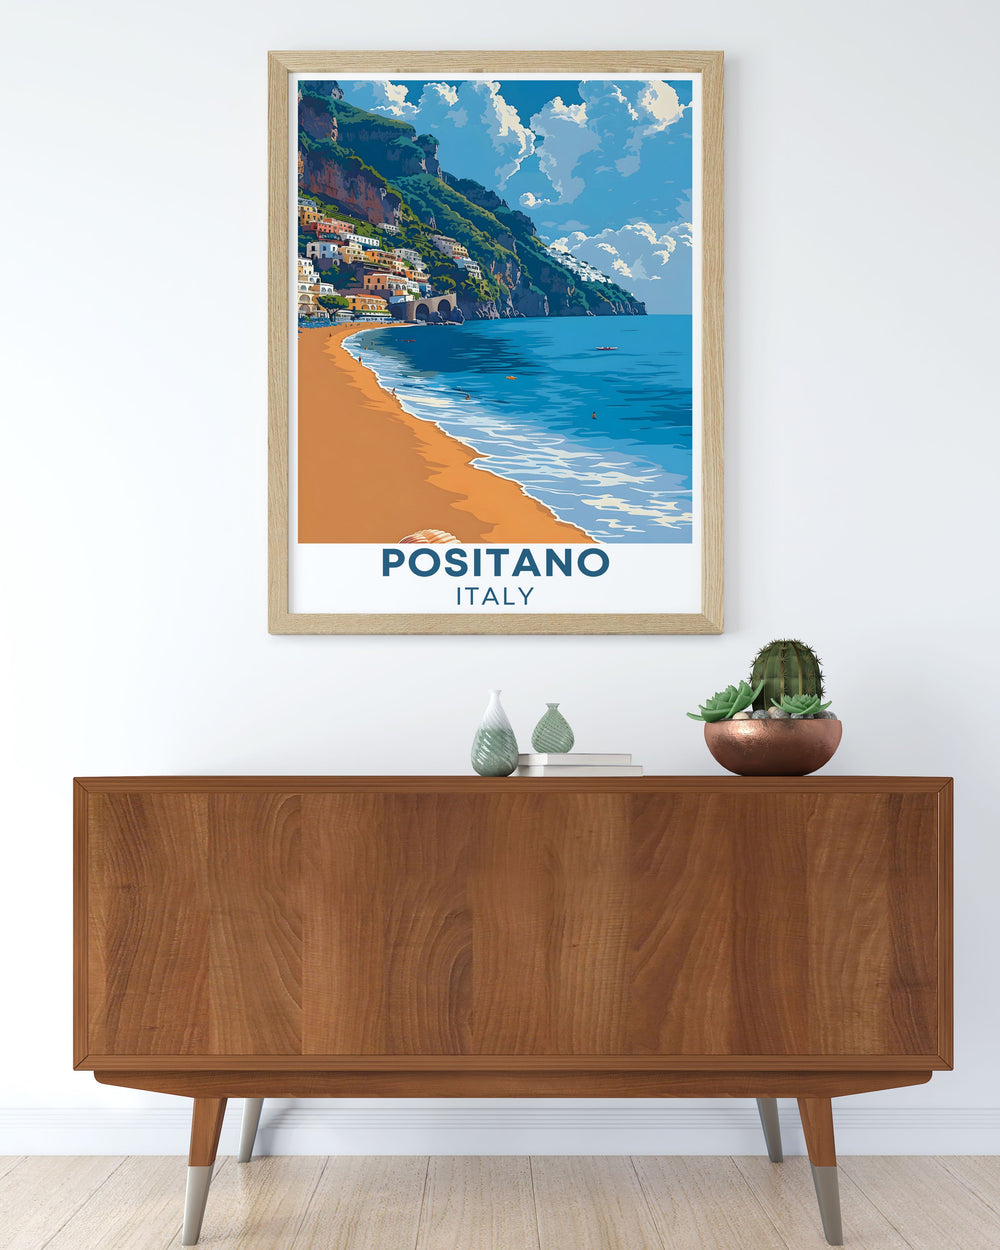 Amalfi Coast print showcasing the iconic Spiaggia Grande in Positano offering a scenic view that brings the essence of Italian coastal beauty to your wall art collection and enriches your home decor with a splash of Mediterranean elegance